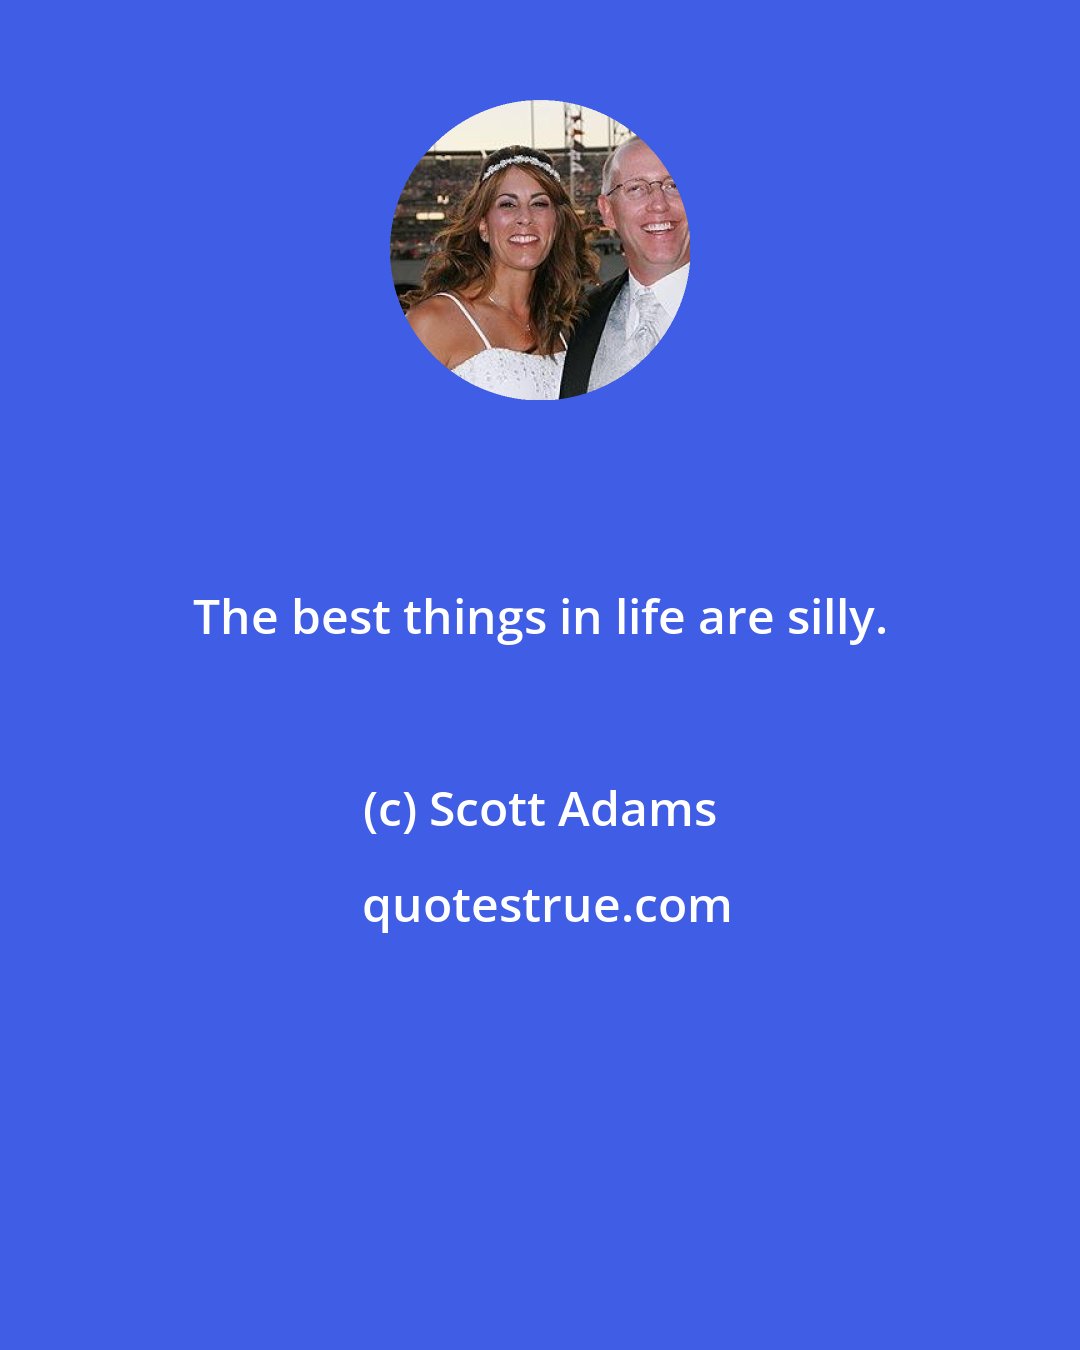 Scott Adams: The best things in life are silly.